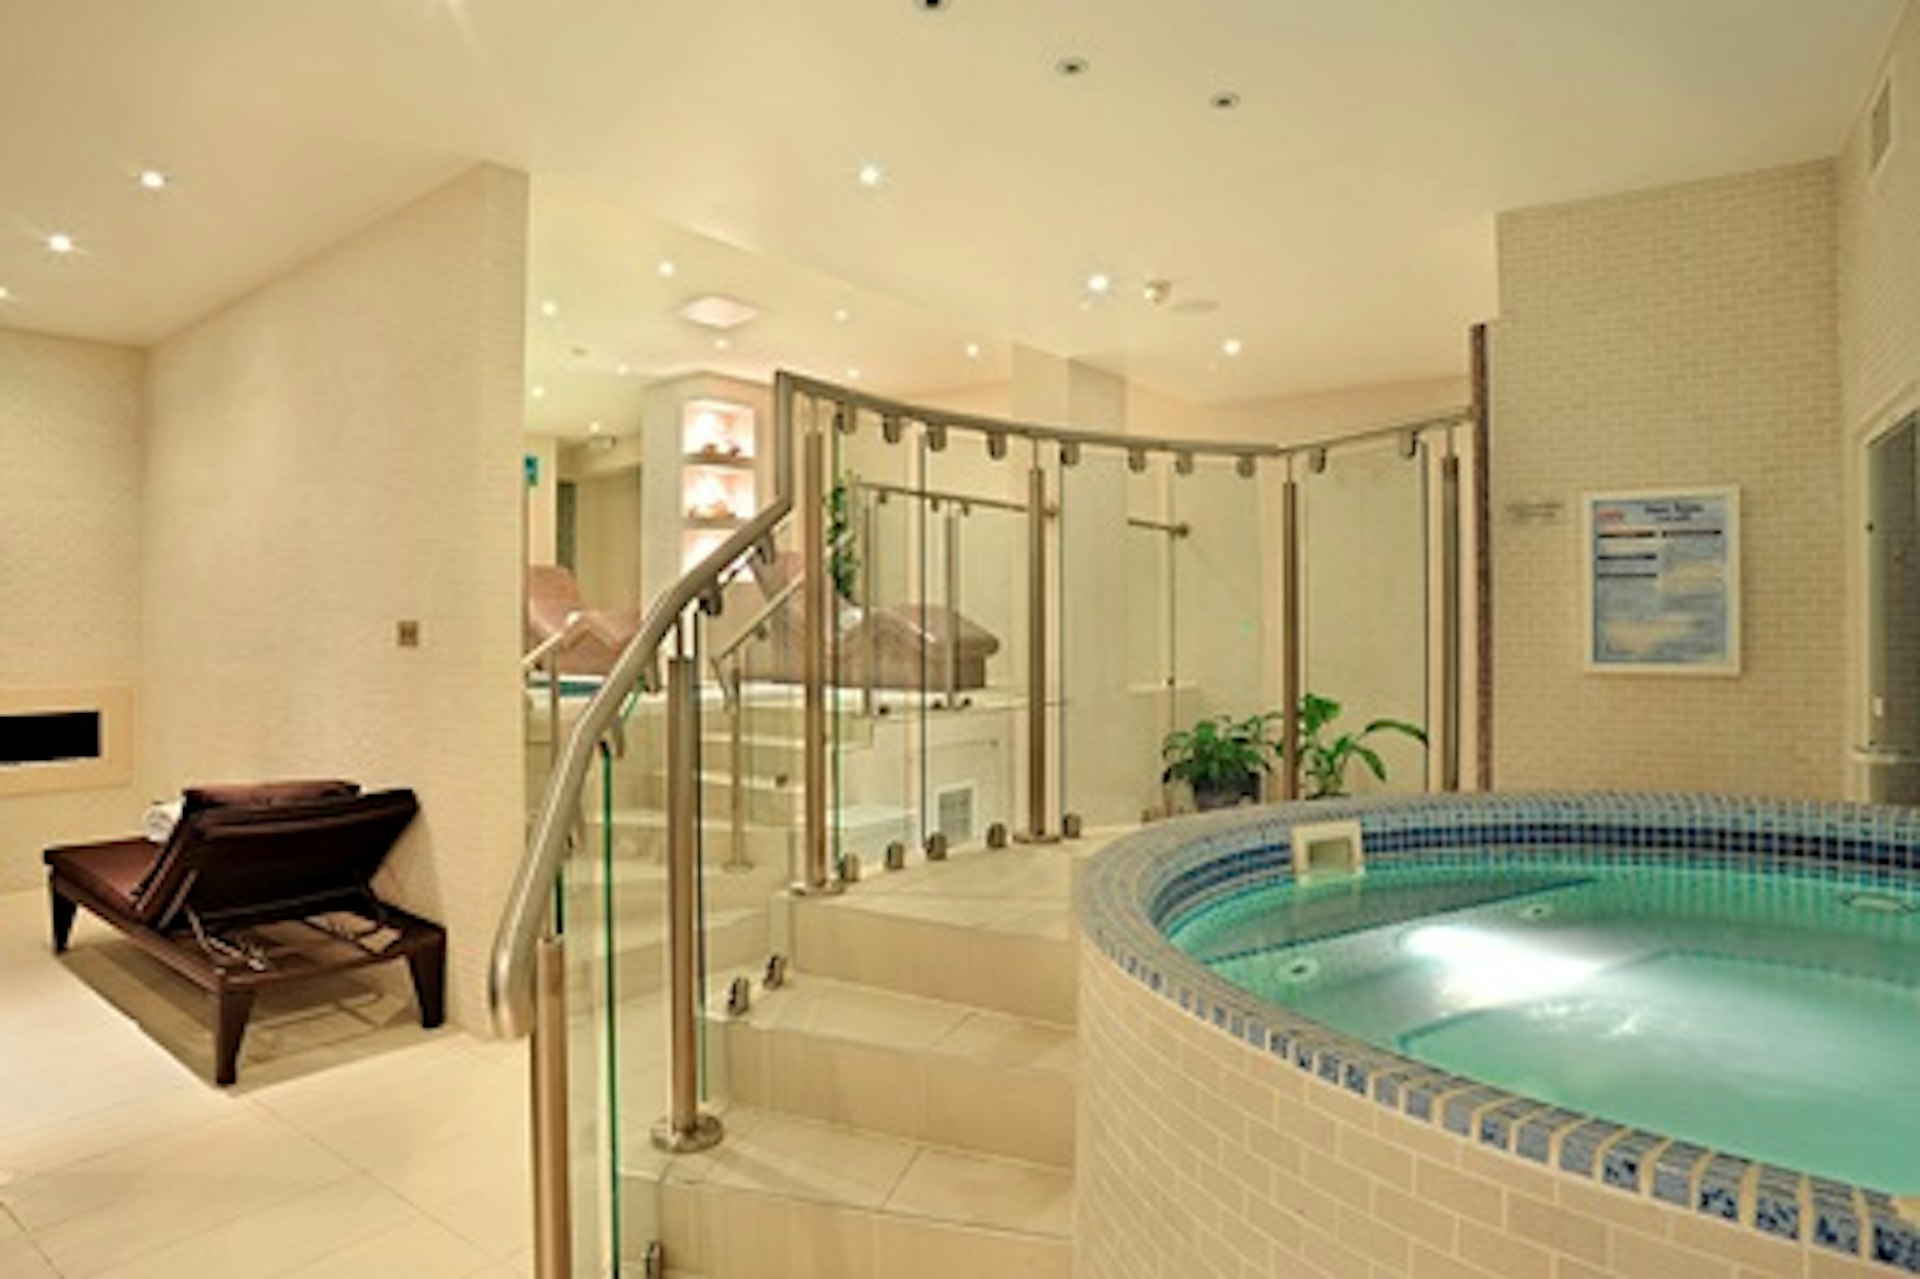 Weekday Spa Relaxation with Treatment and Prosecco for Two at the 5* Montcalm Hotel, London 1